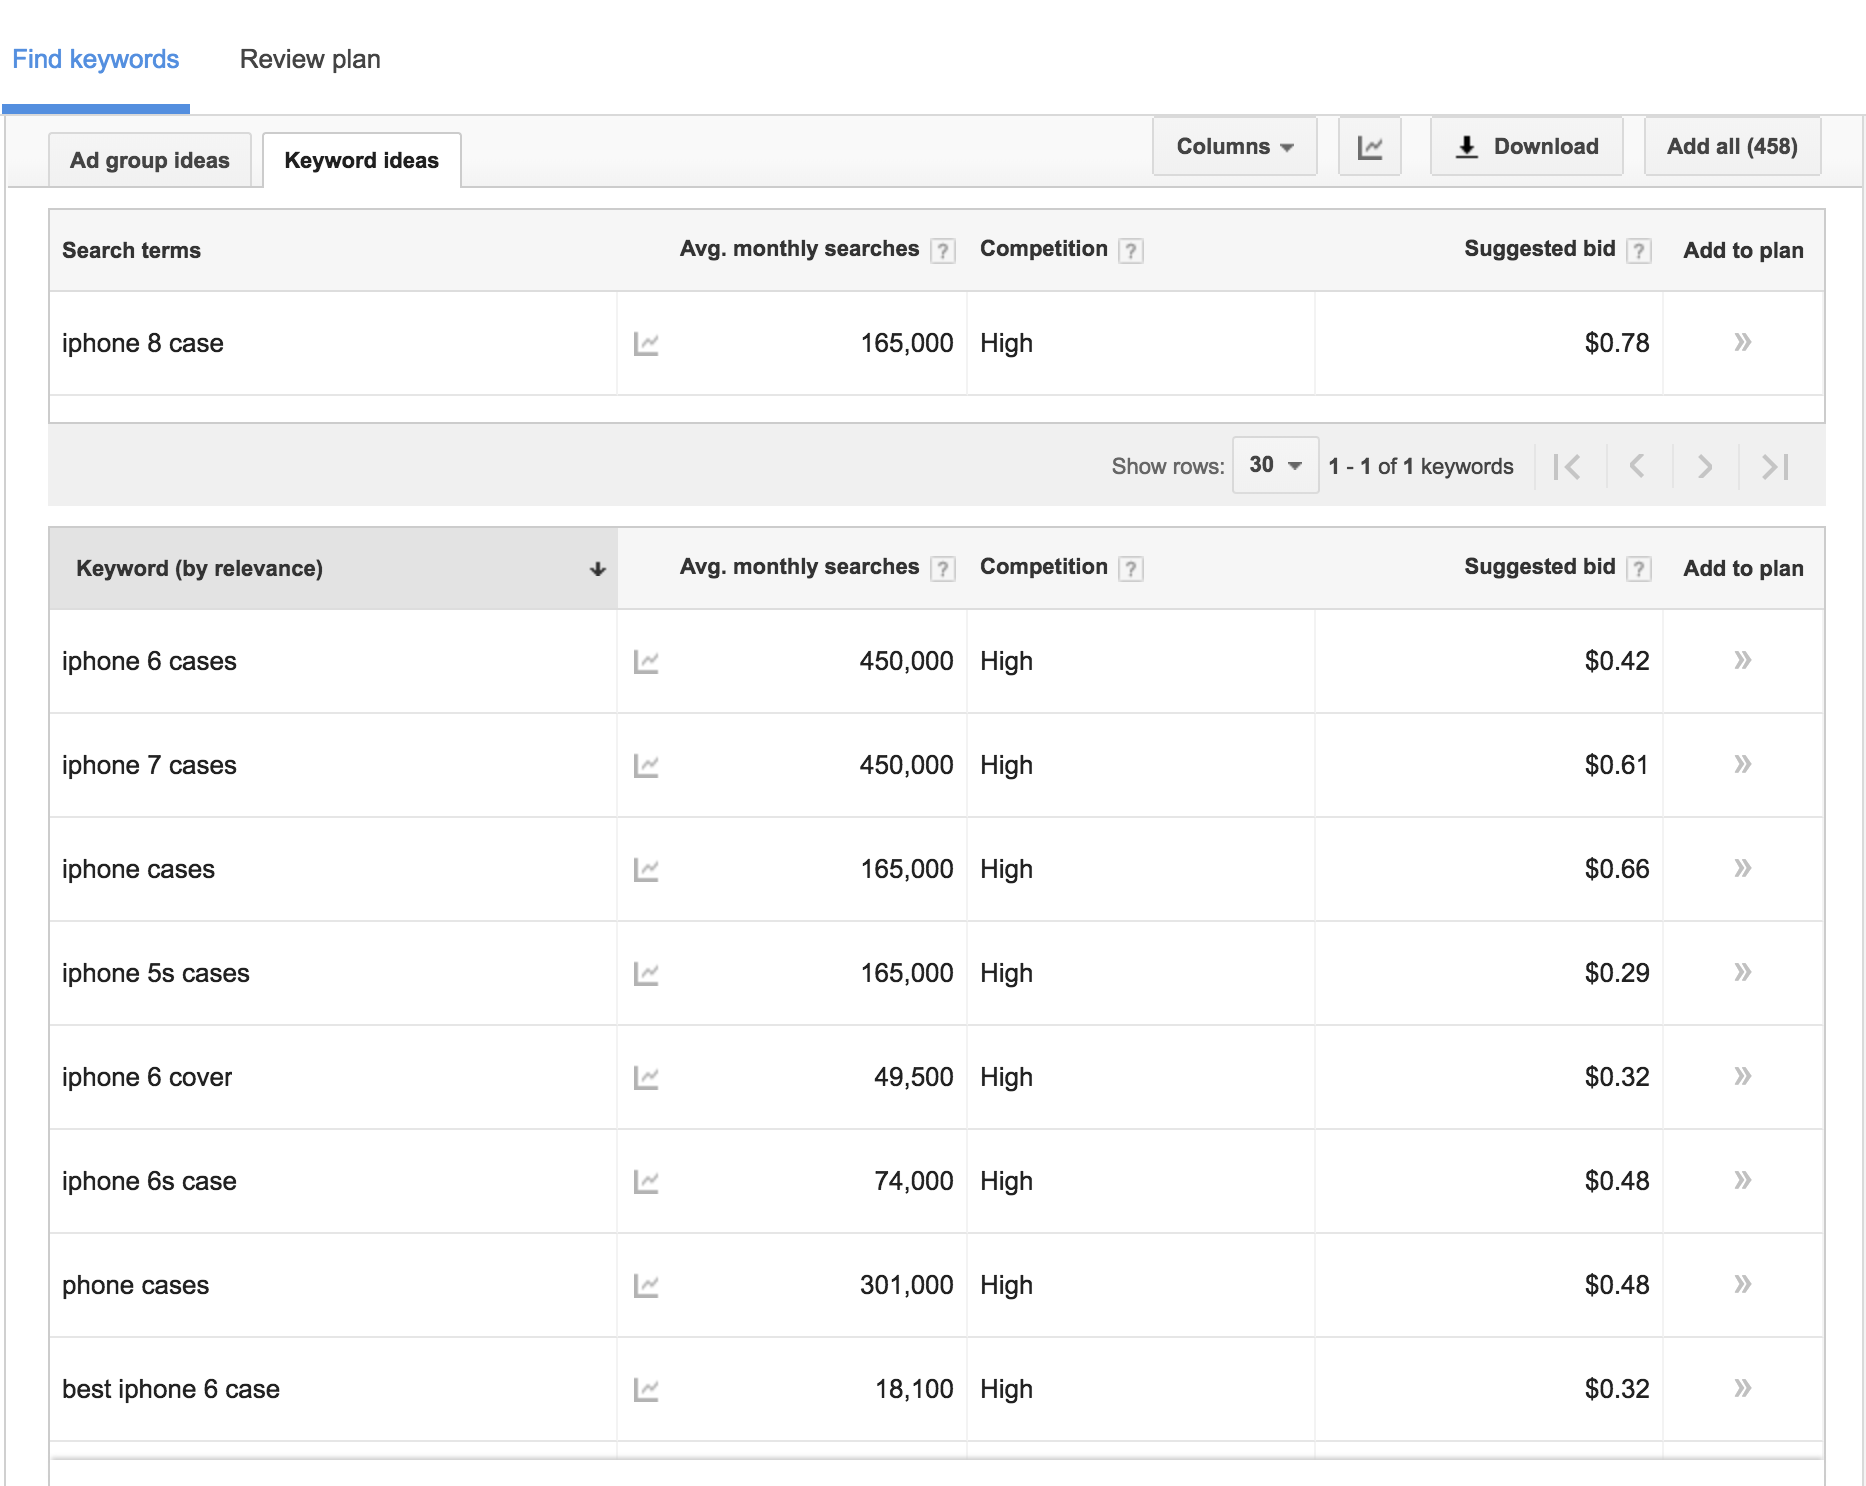 Screenshot of the Google Keyword Planner and some of its flaws compared to an Amazon keyword tool